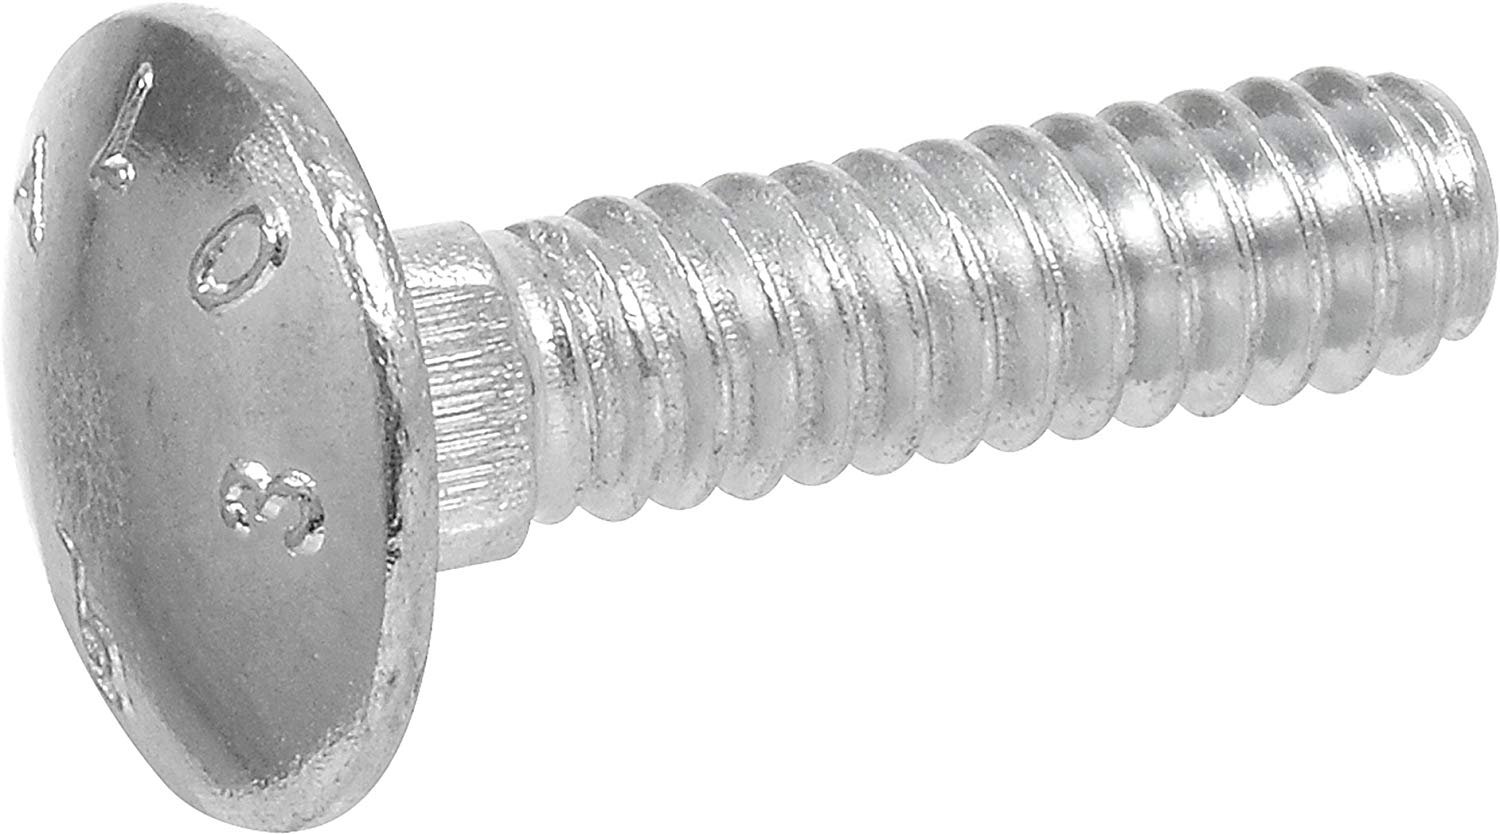 Hillman 240321 Carriage Bolt, 1/2 x 4-1/2-Inch, Steel, Zinc-Plated, Silver, 25-Pack - image 1 of 3